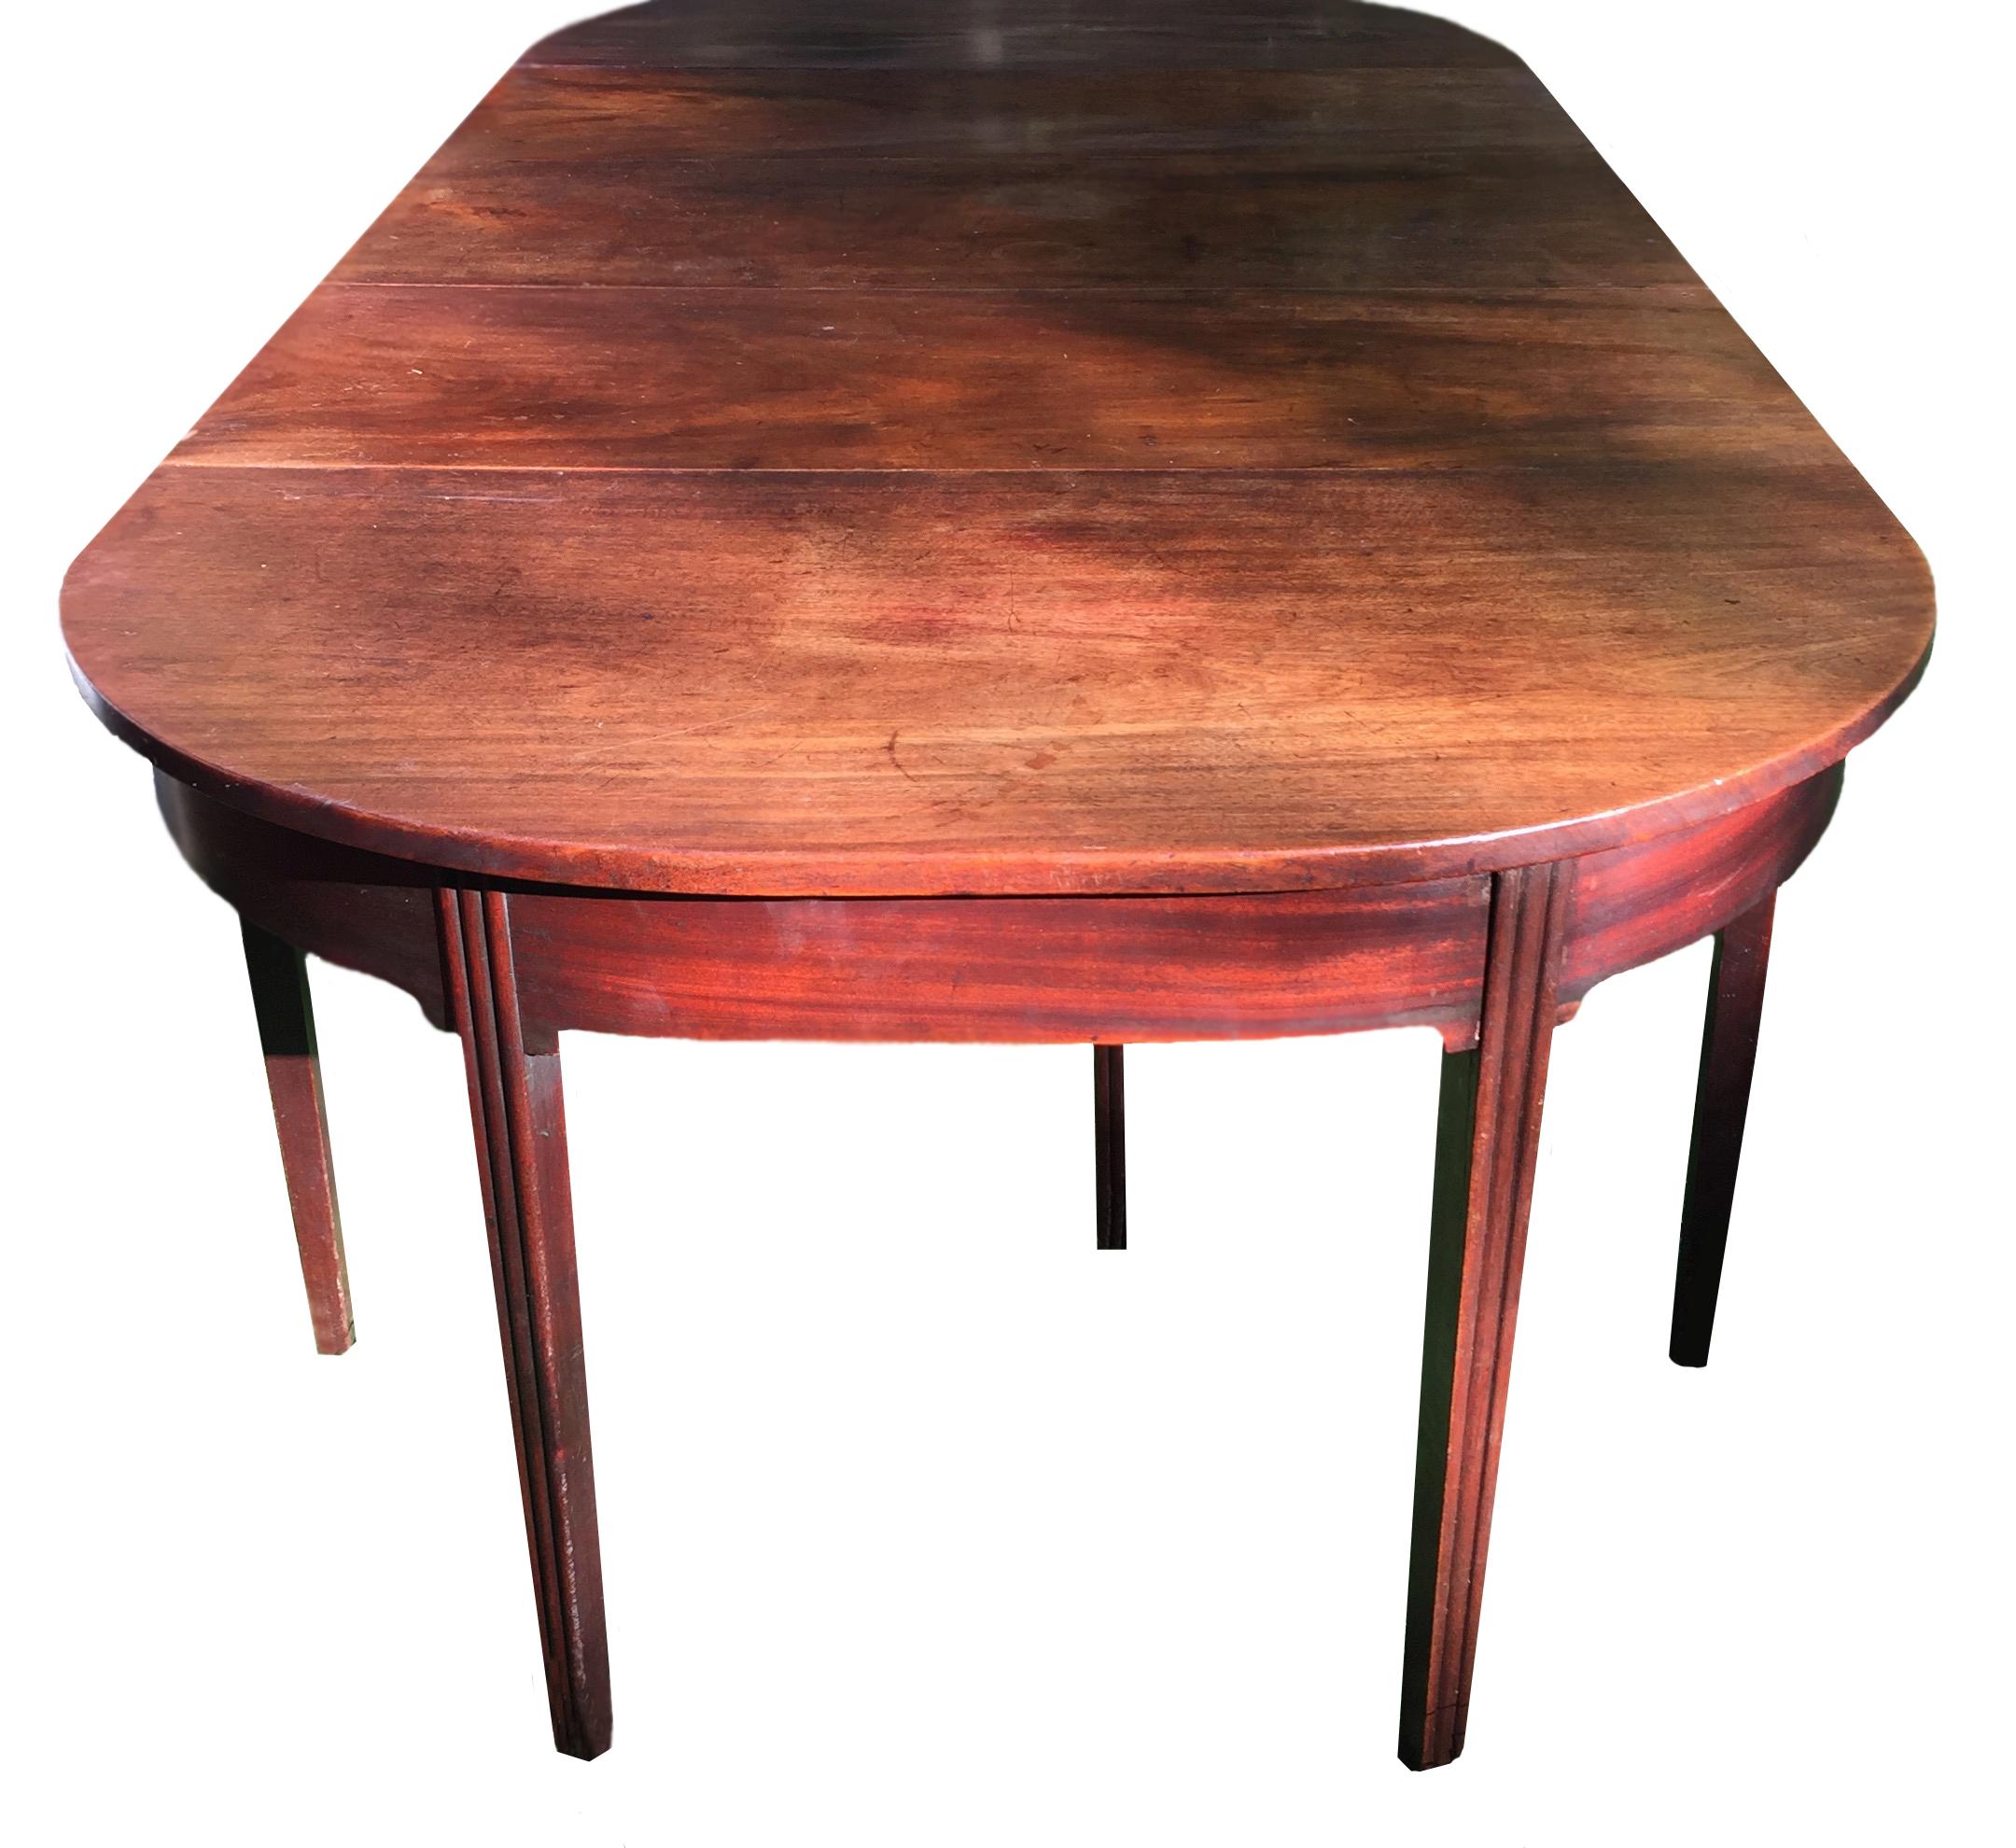 A wonderful Georgian mahogany dining table with multiple configurations. In an original condition with no apparent repairs or additions.

When not required as a dining table, it breaks down into 3 key components - the central piece with drop